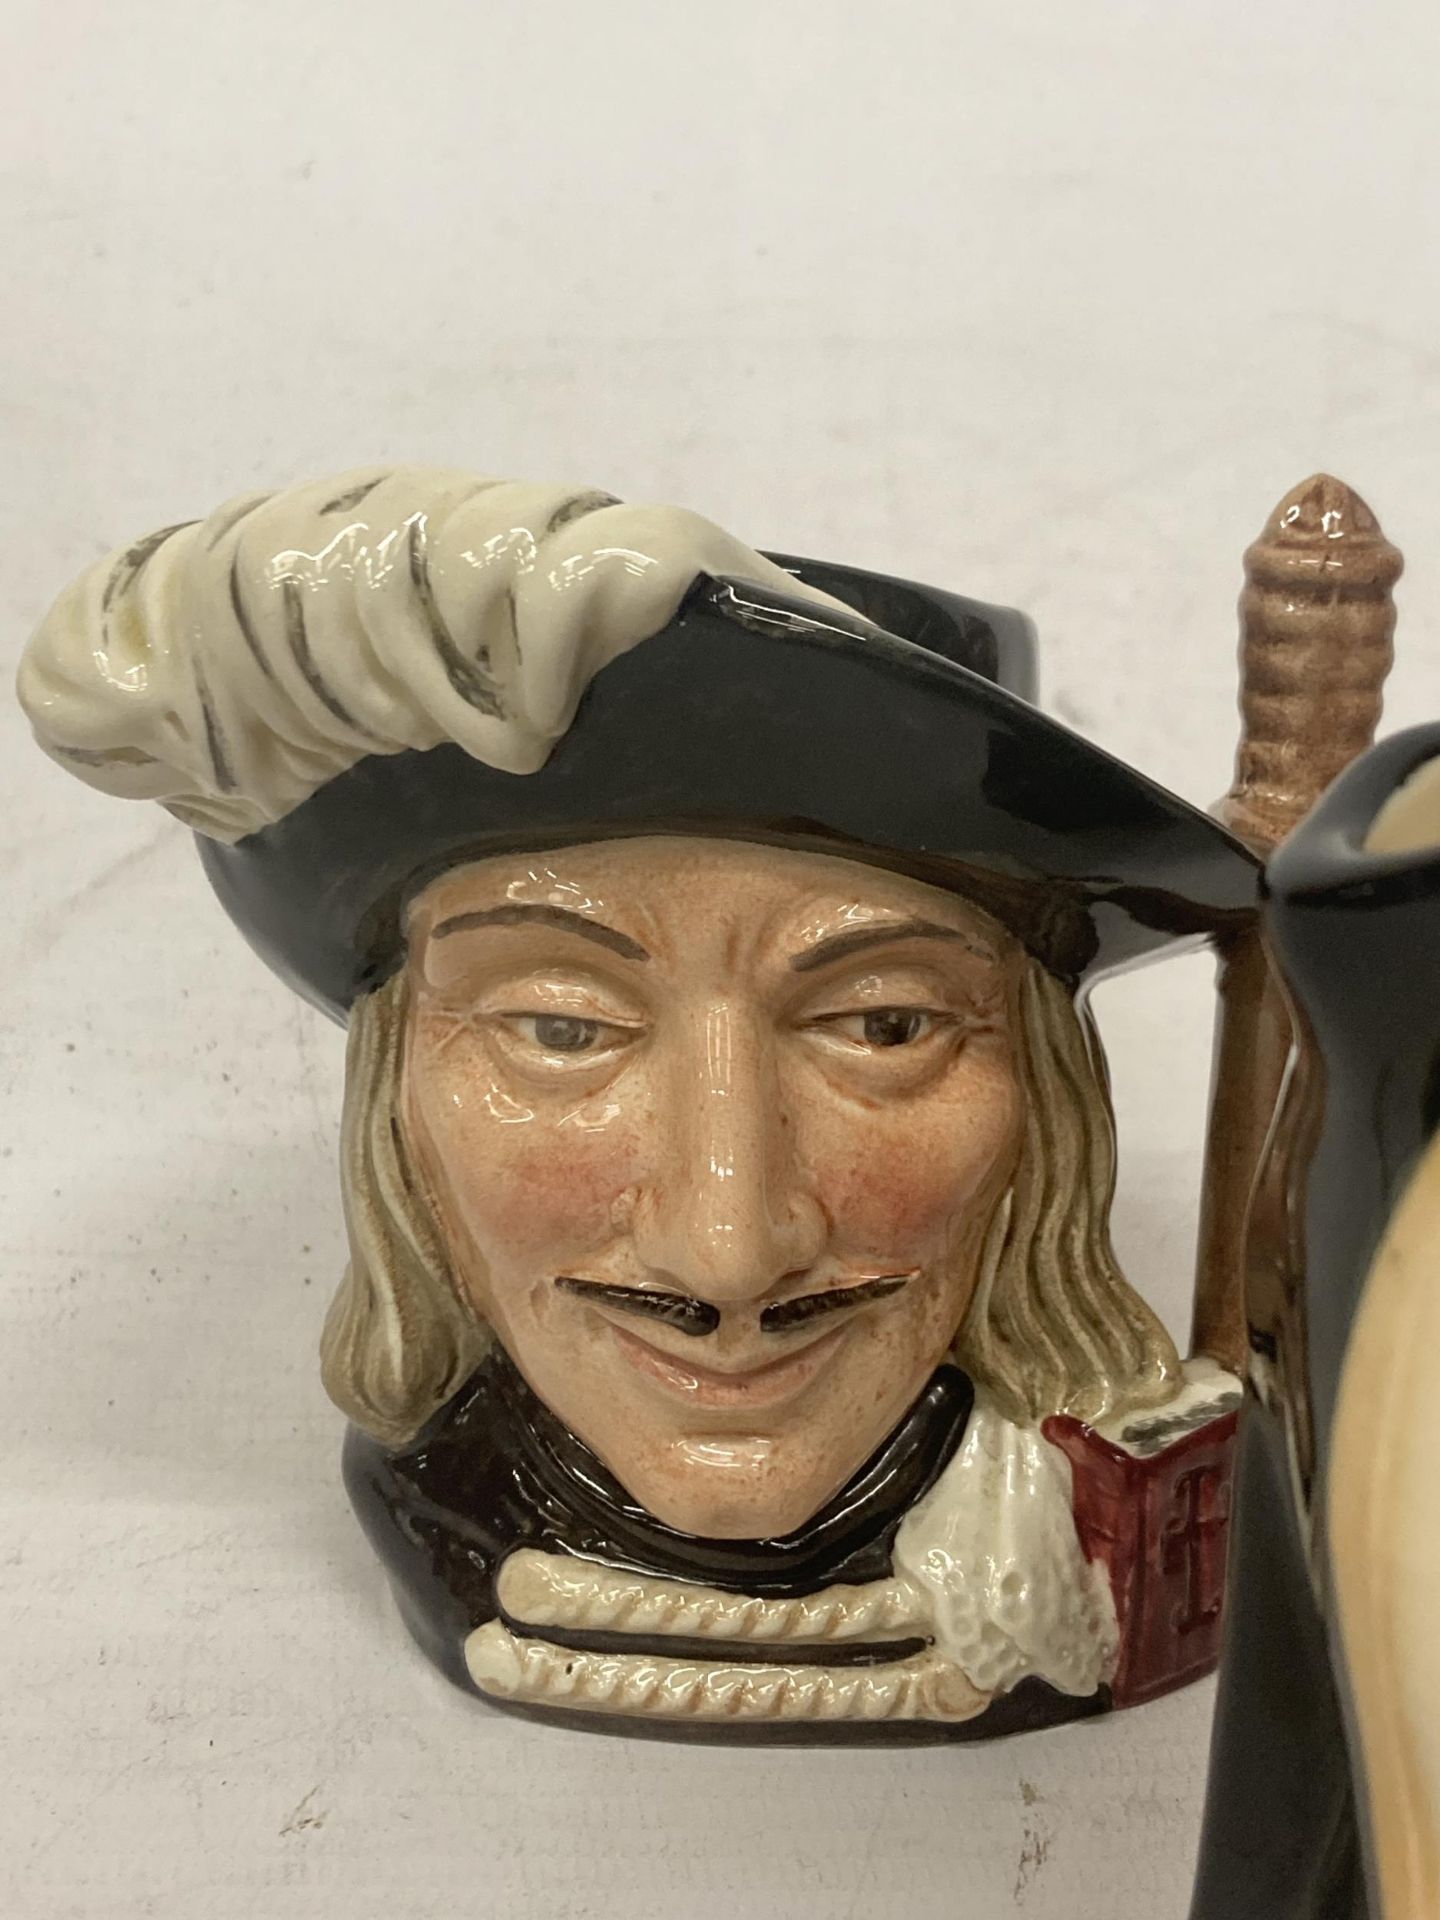 SIX CHARACTER JUGS TO INCLUDE ROYAL DOULTON BEEFEATER, ARAMIS, CATHERINE OF ARAGON, ETC., - Image 2 of 4